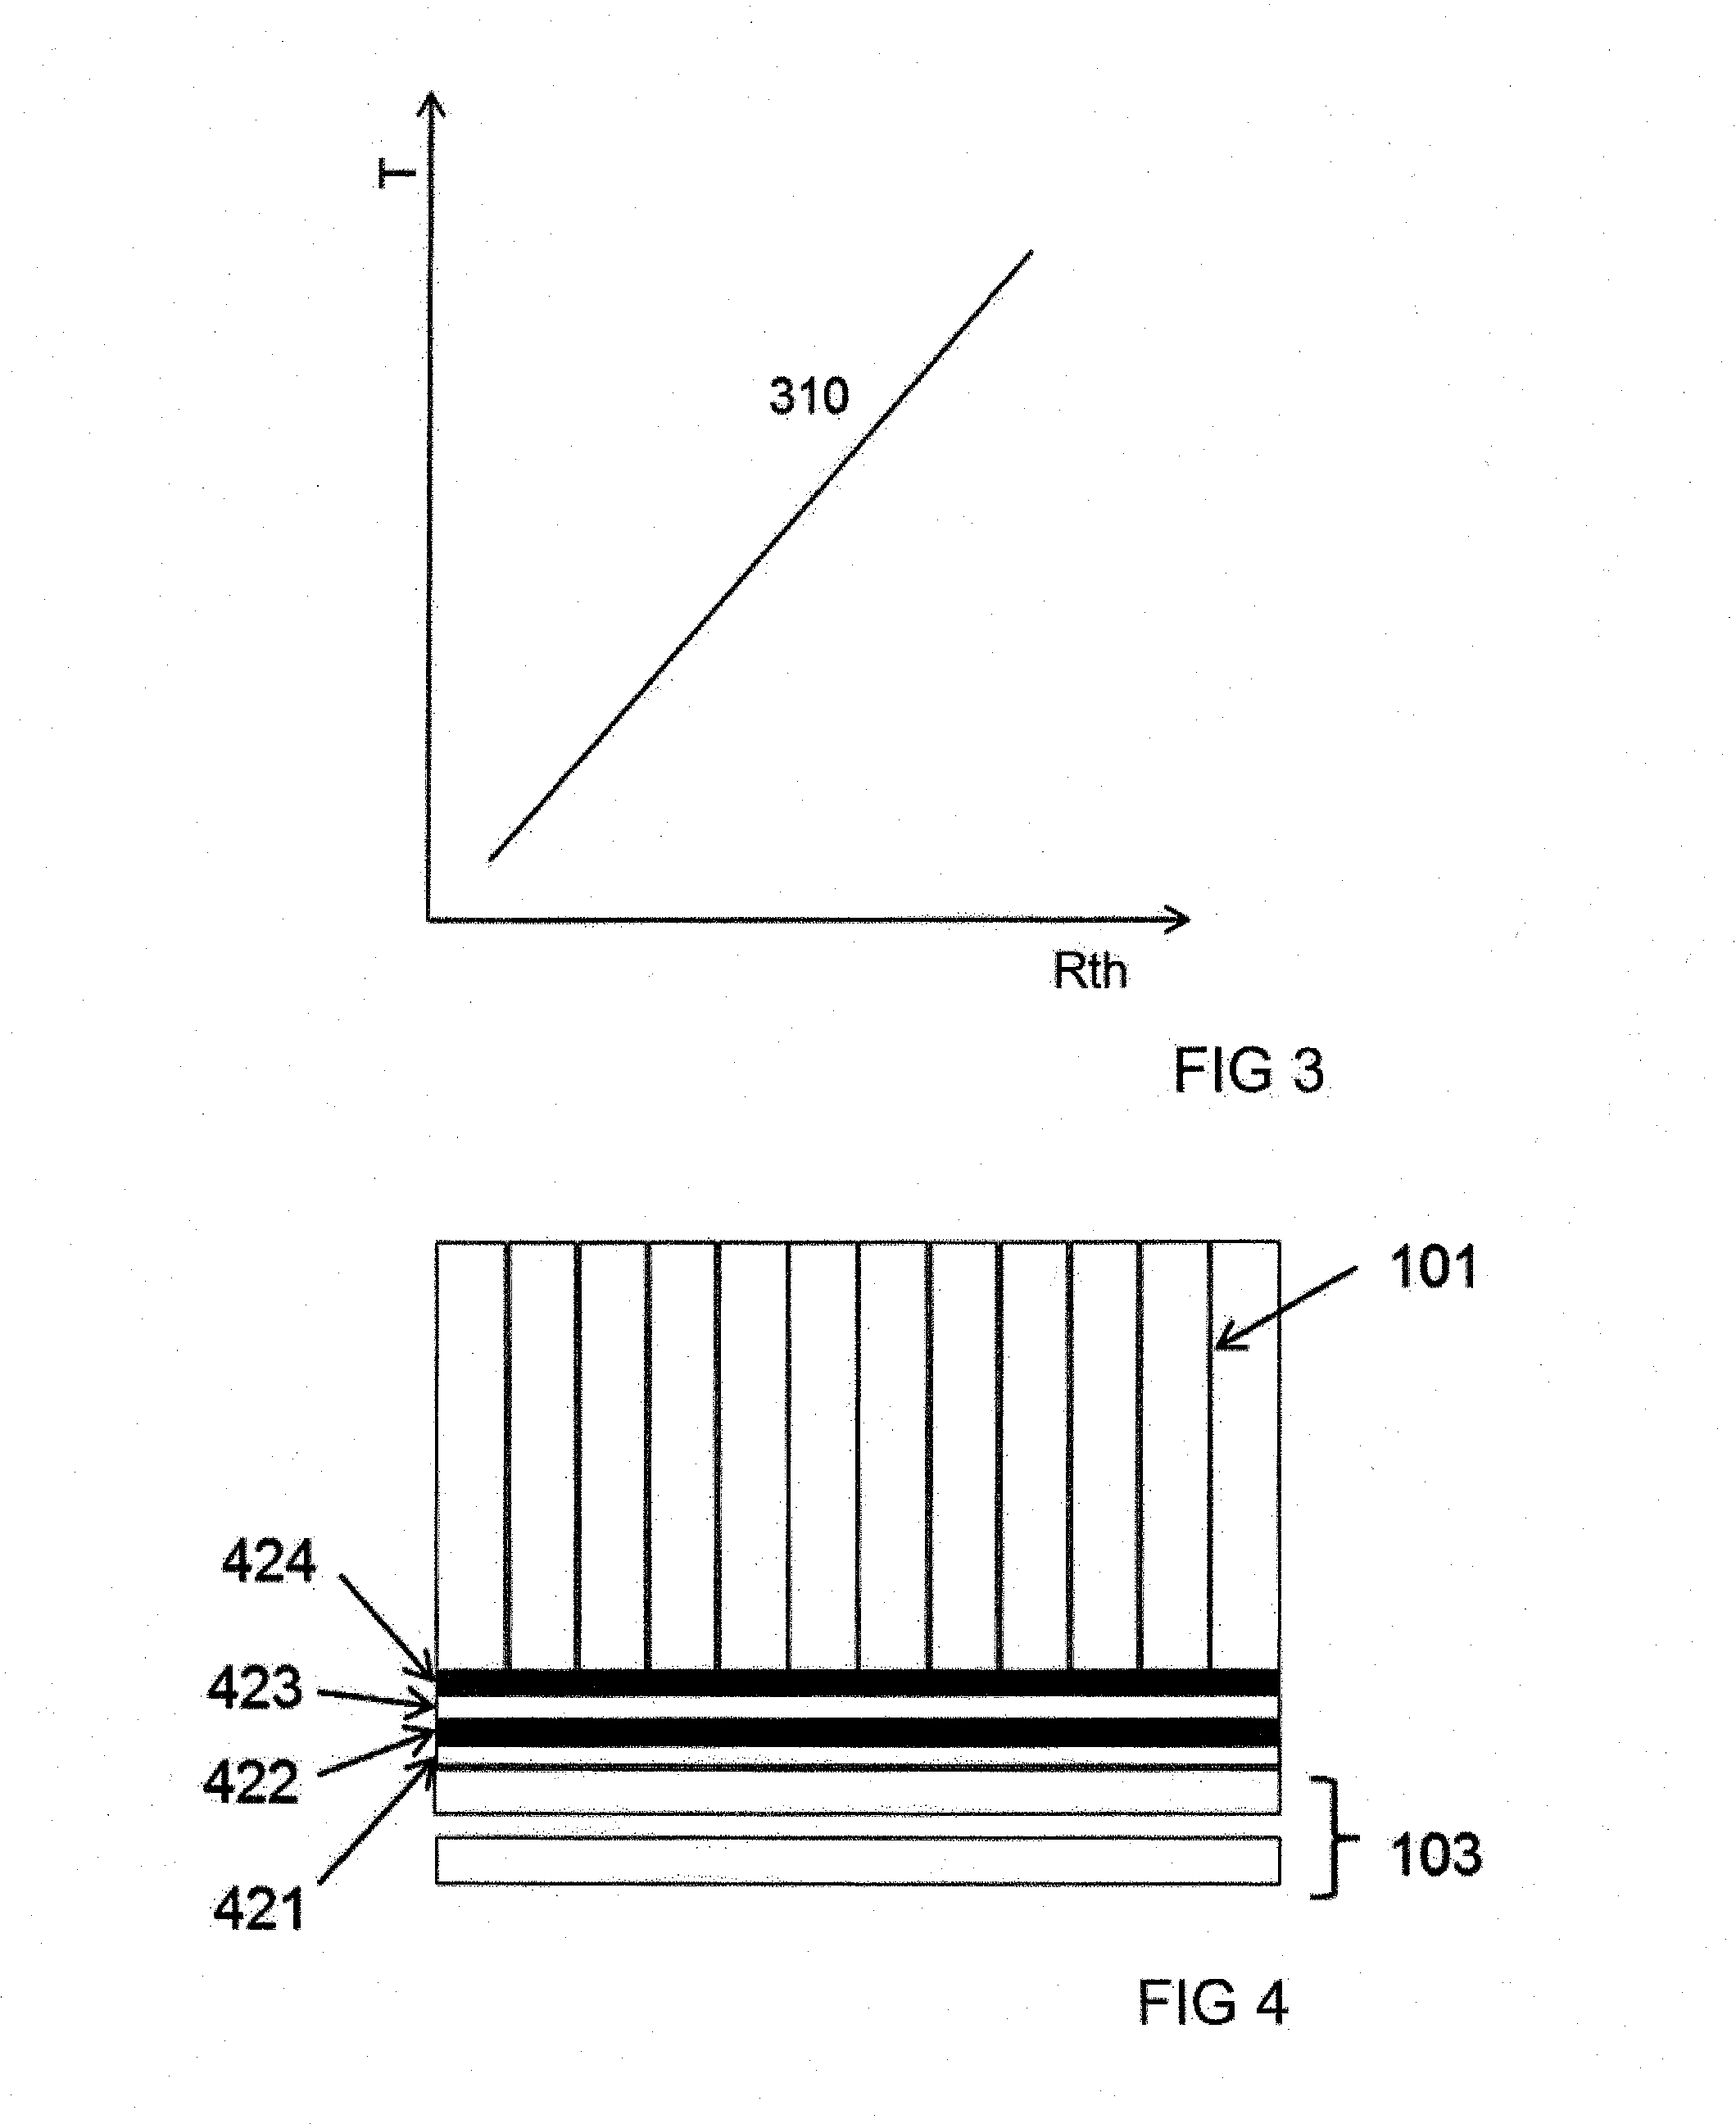 Thermal transfer device, temperature-control panel, and energy storage device